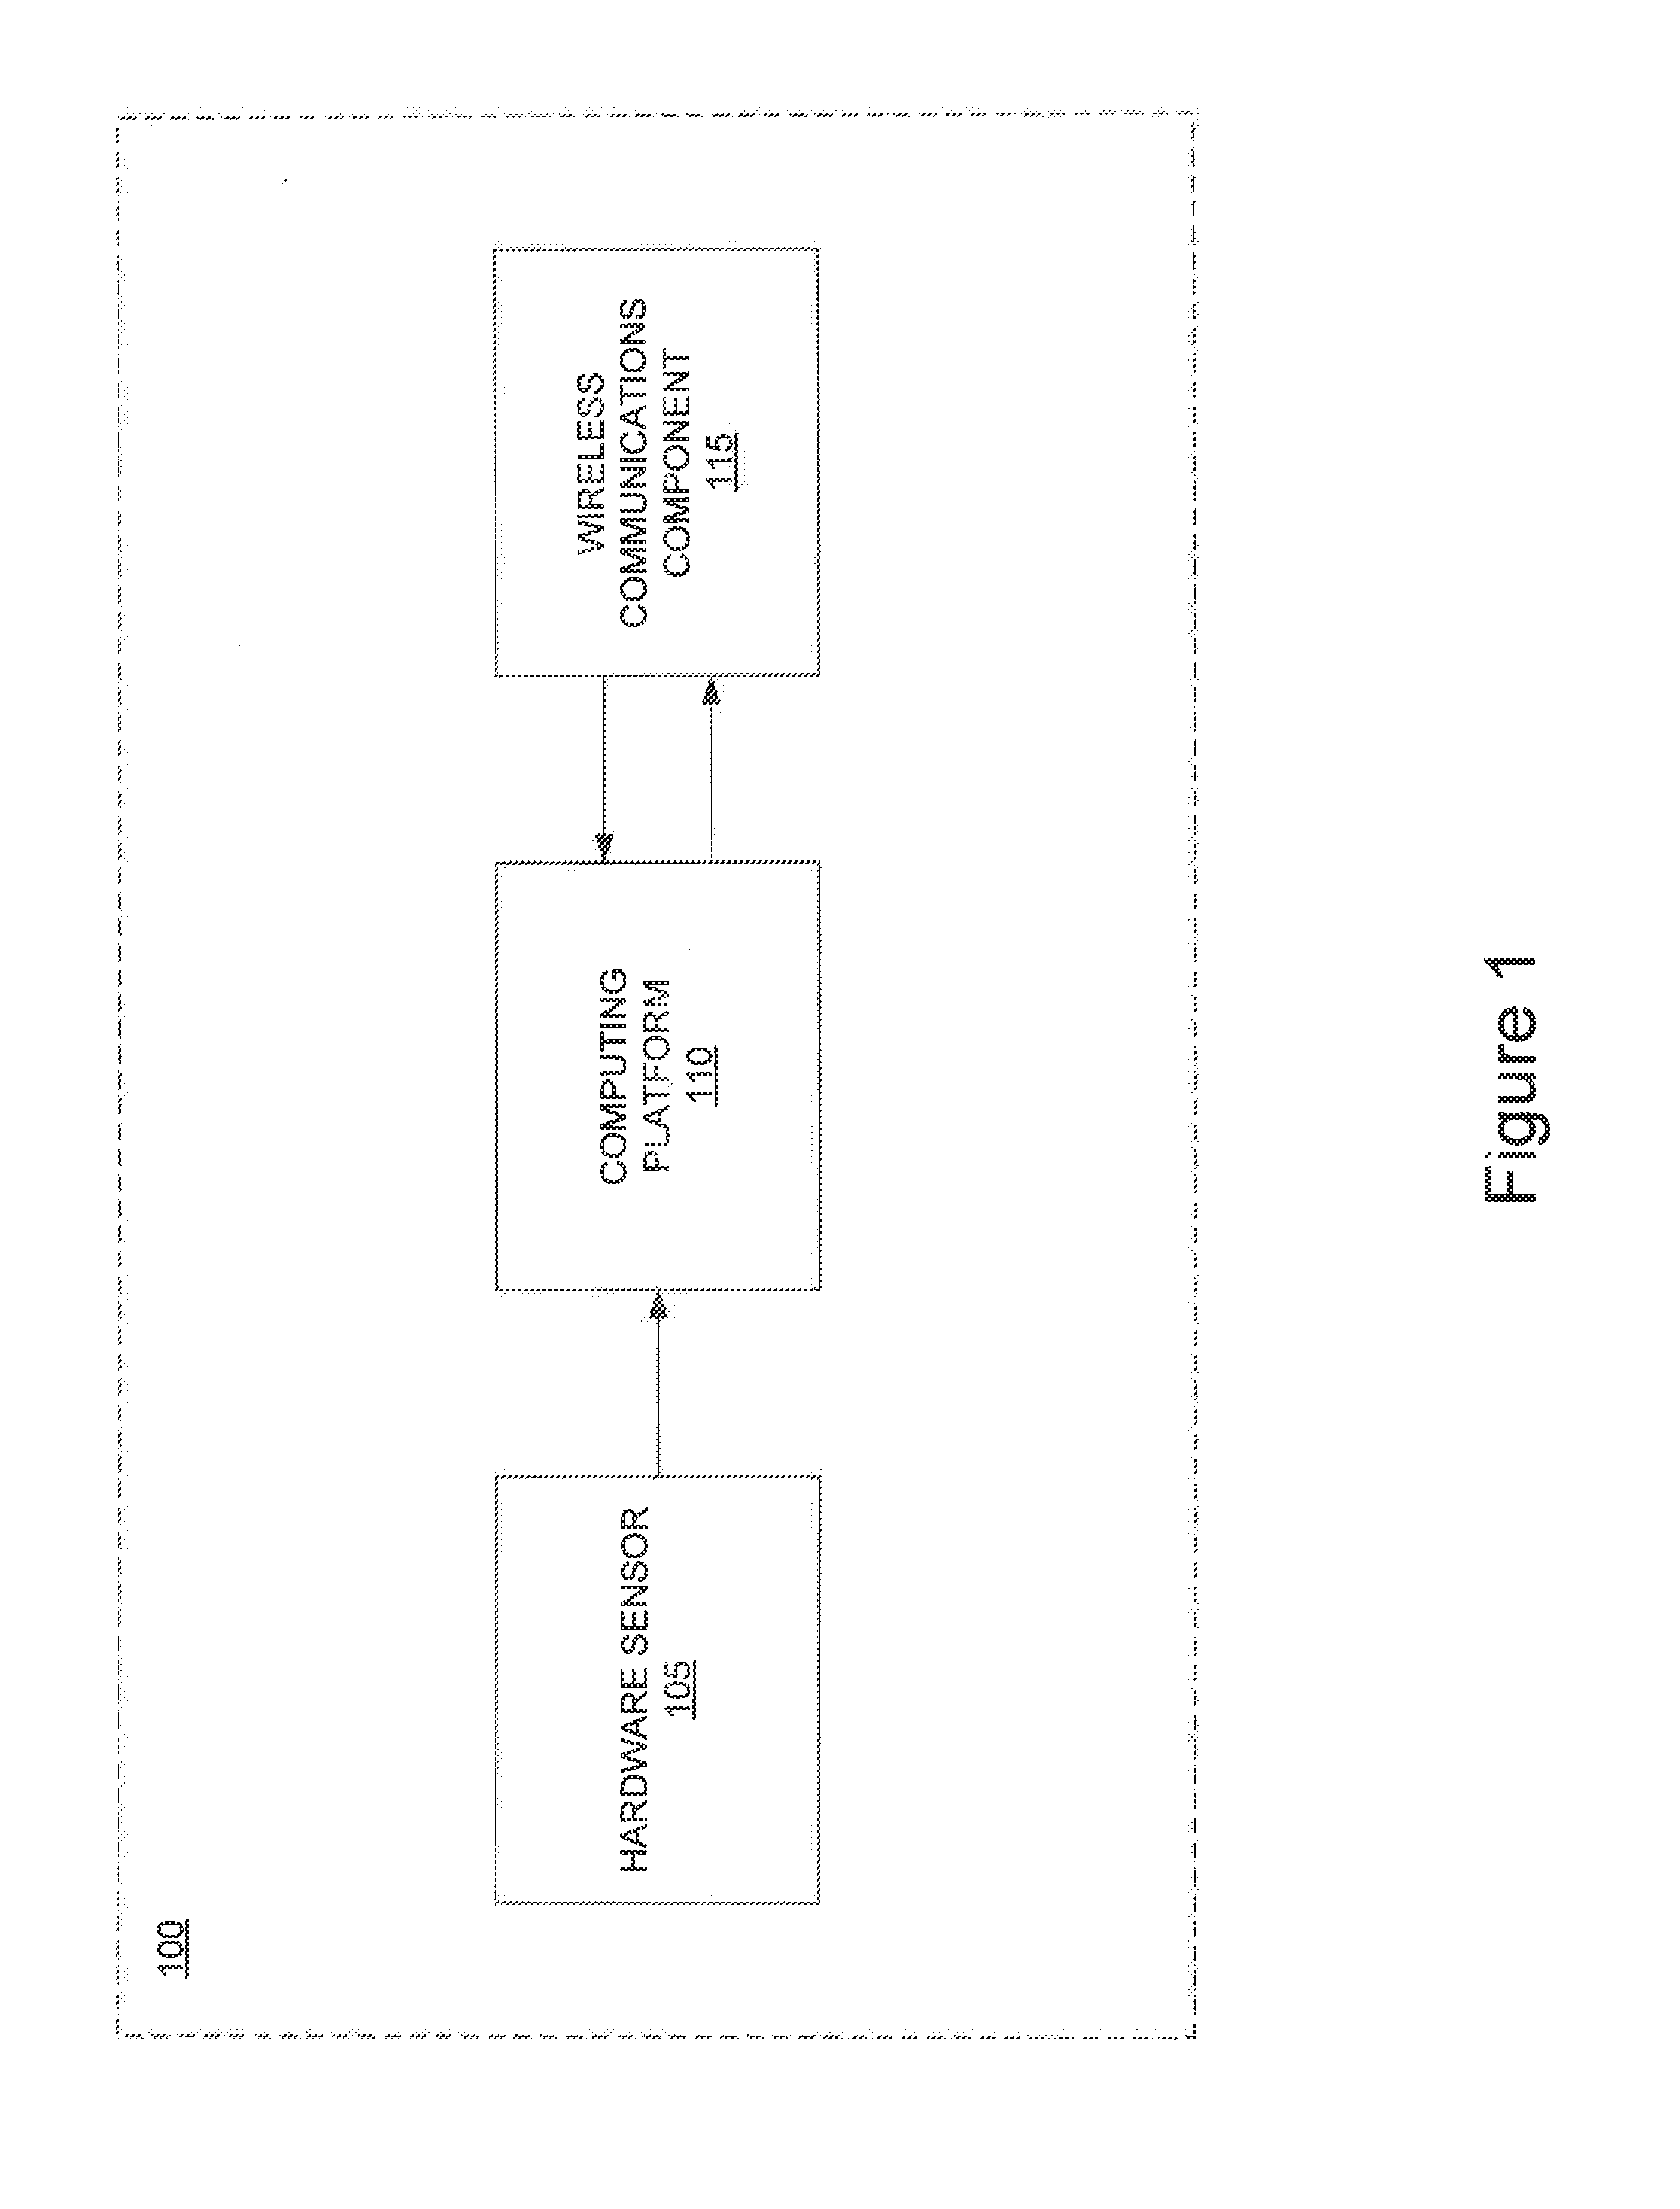 System and method for performing a secure cryptographic operation on a mobile device